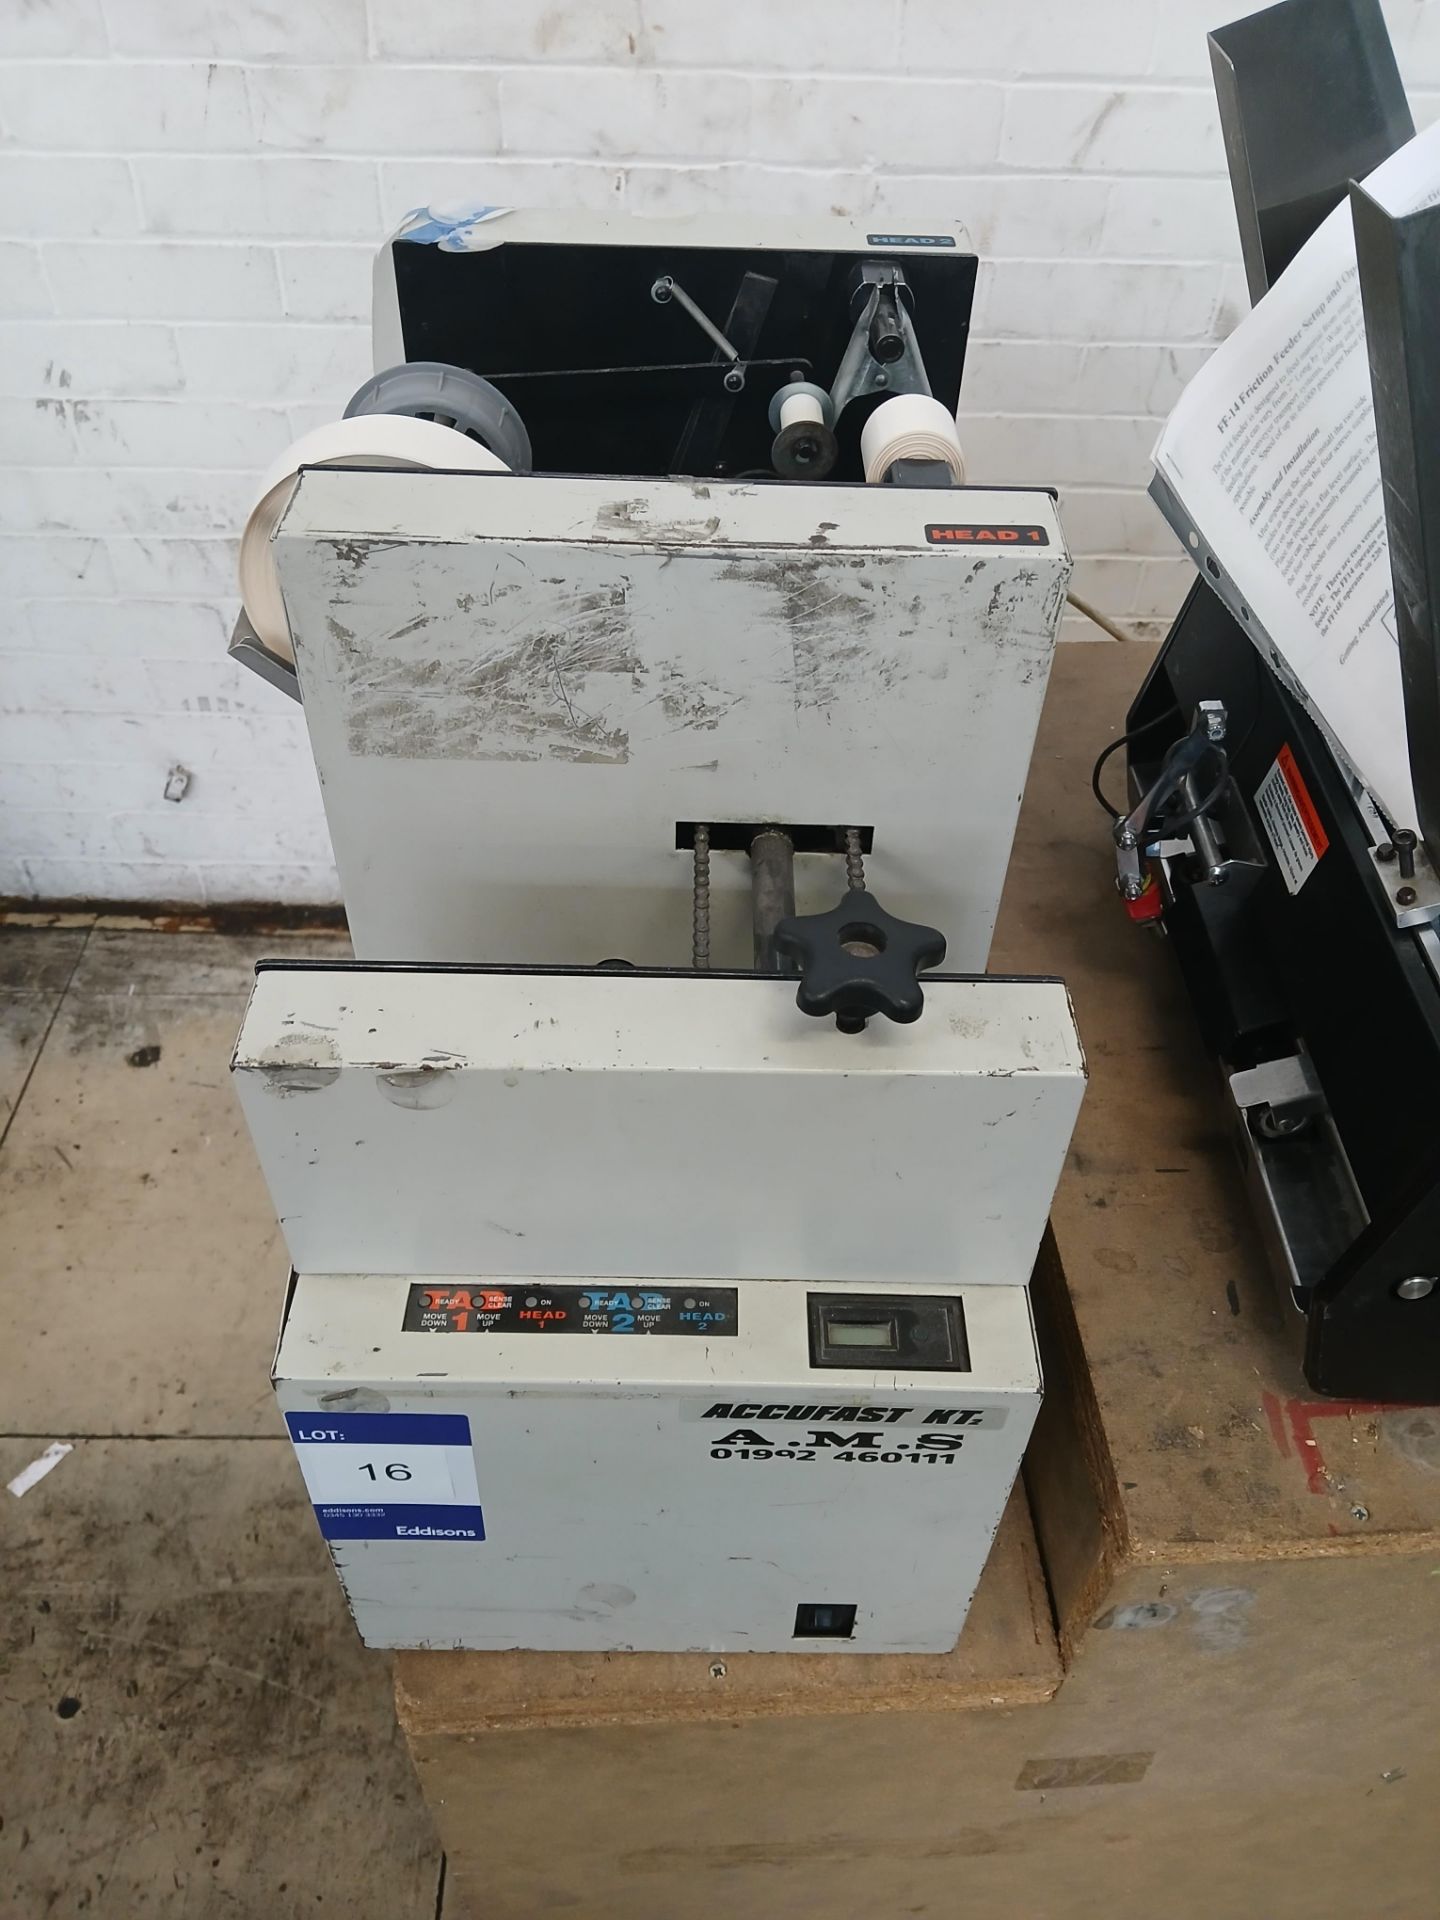 Automecha Accufast KT2 twin head single tabber mailing machine, Serial Number 411921, 240V - Image 2 of 4